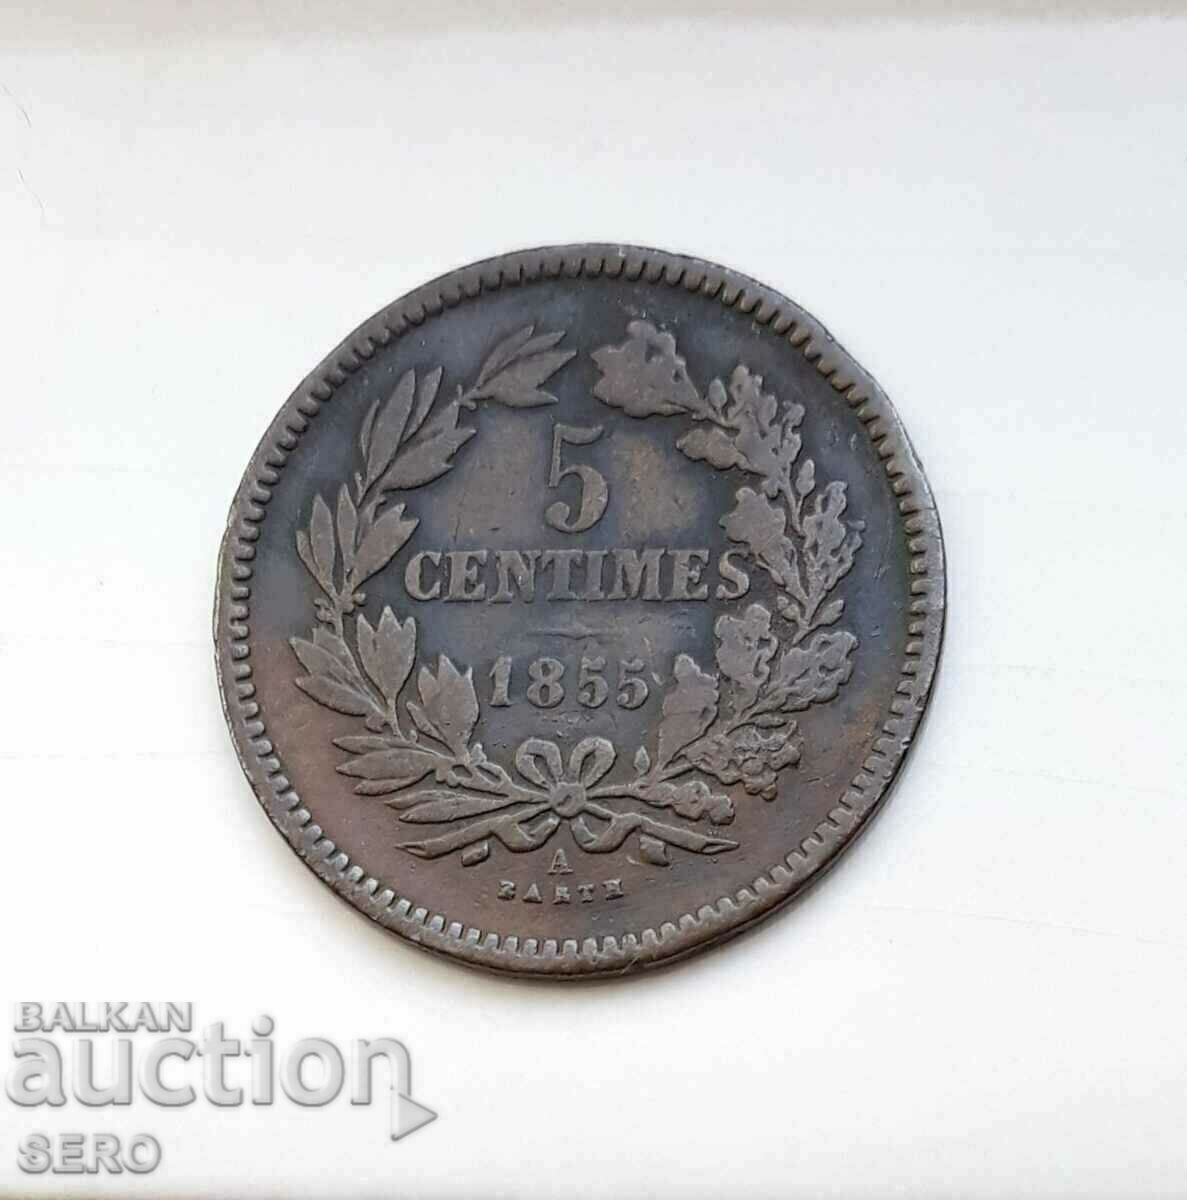 Luxembourg-5 cents 1855